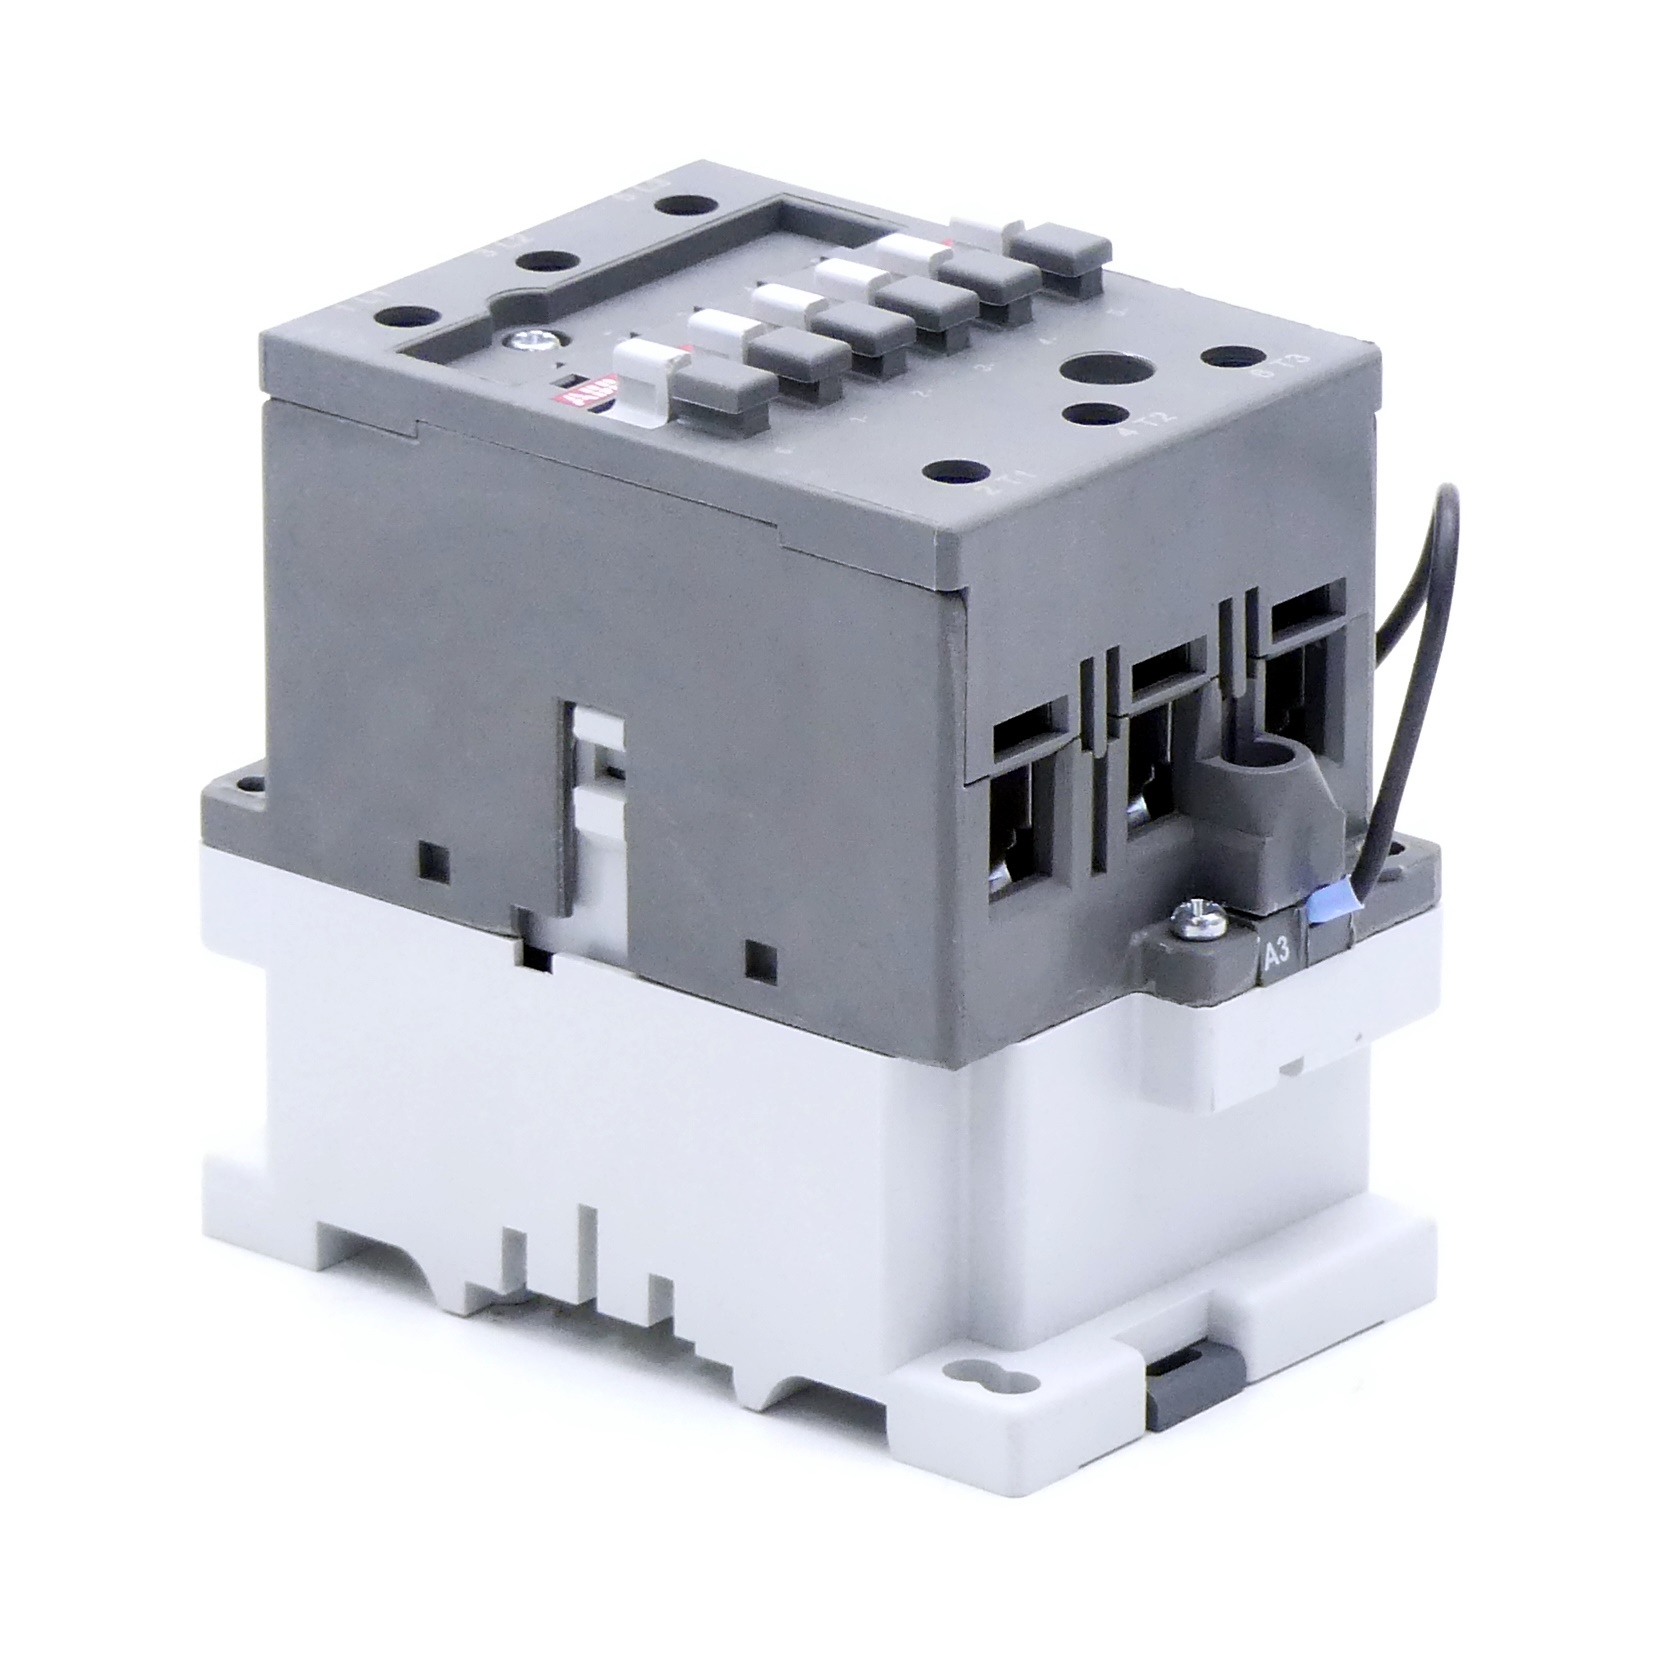 Power contactor AE75-30-11 